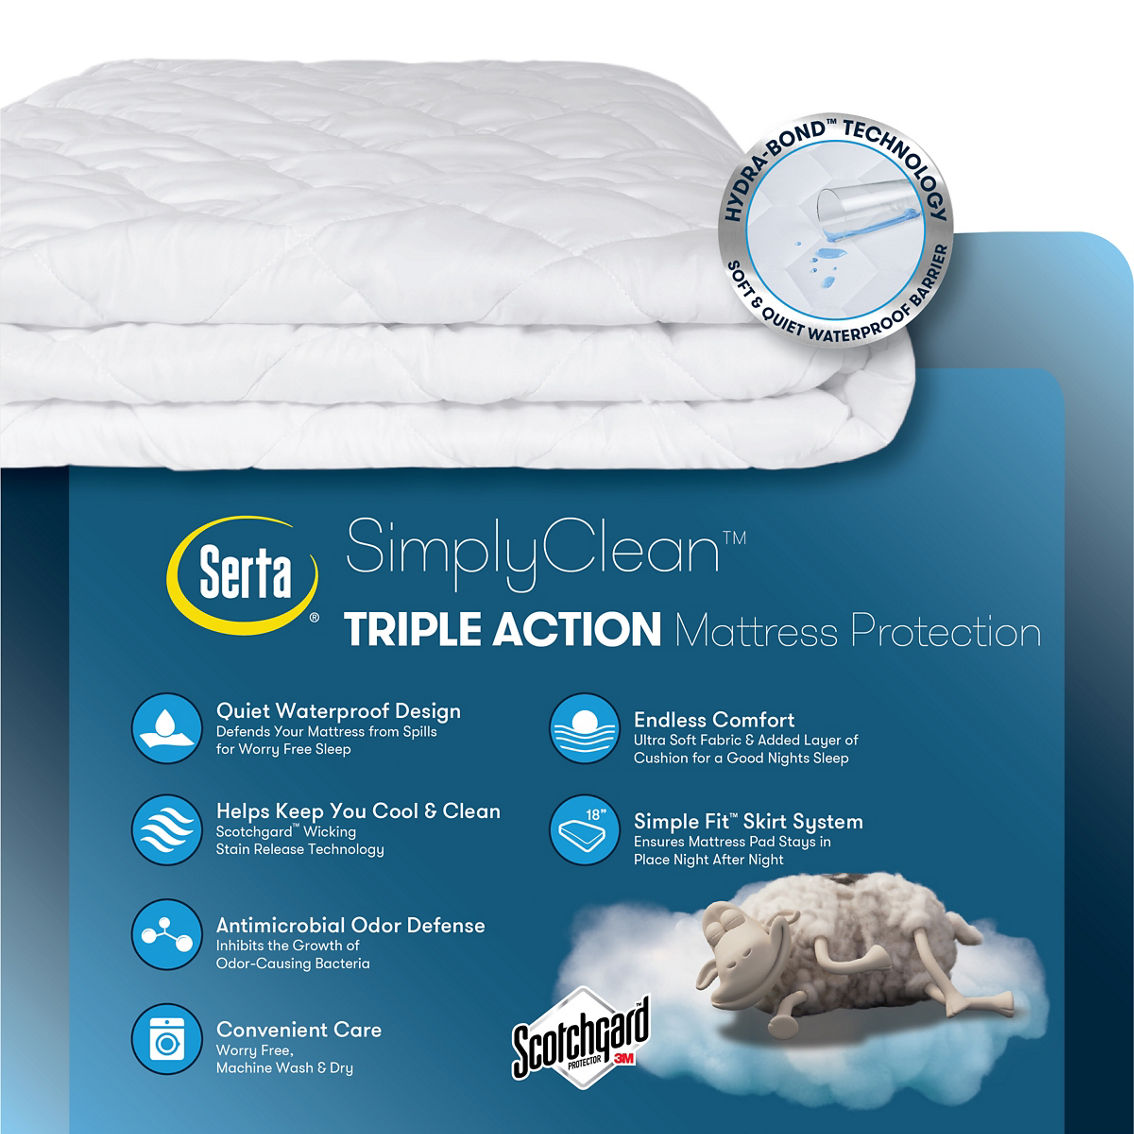 Serta Simply Clean Triple Action Mattress Pad - Image 4 of 4